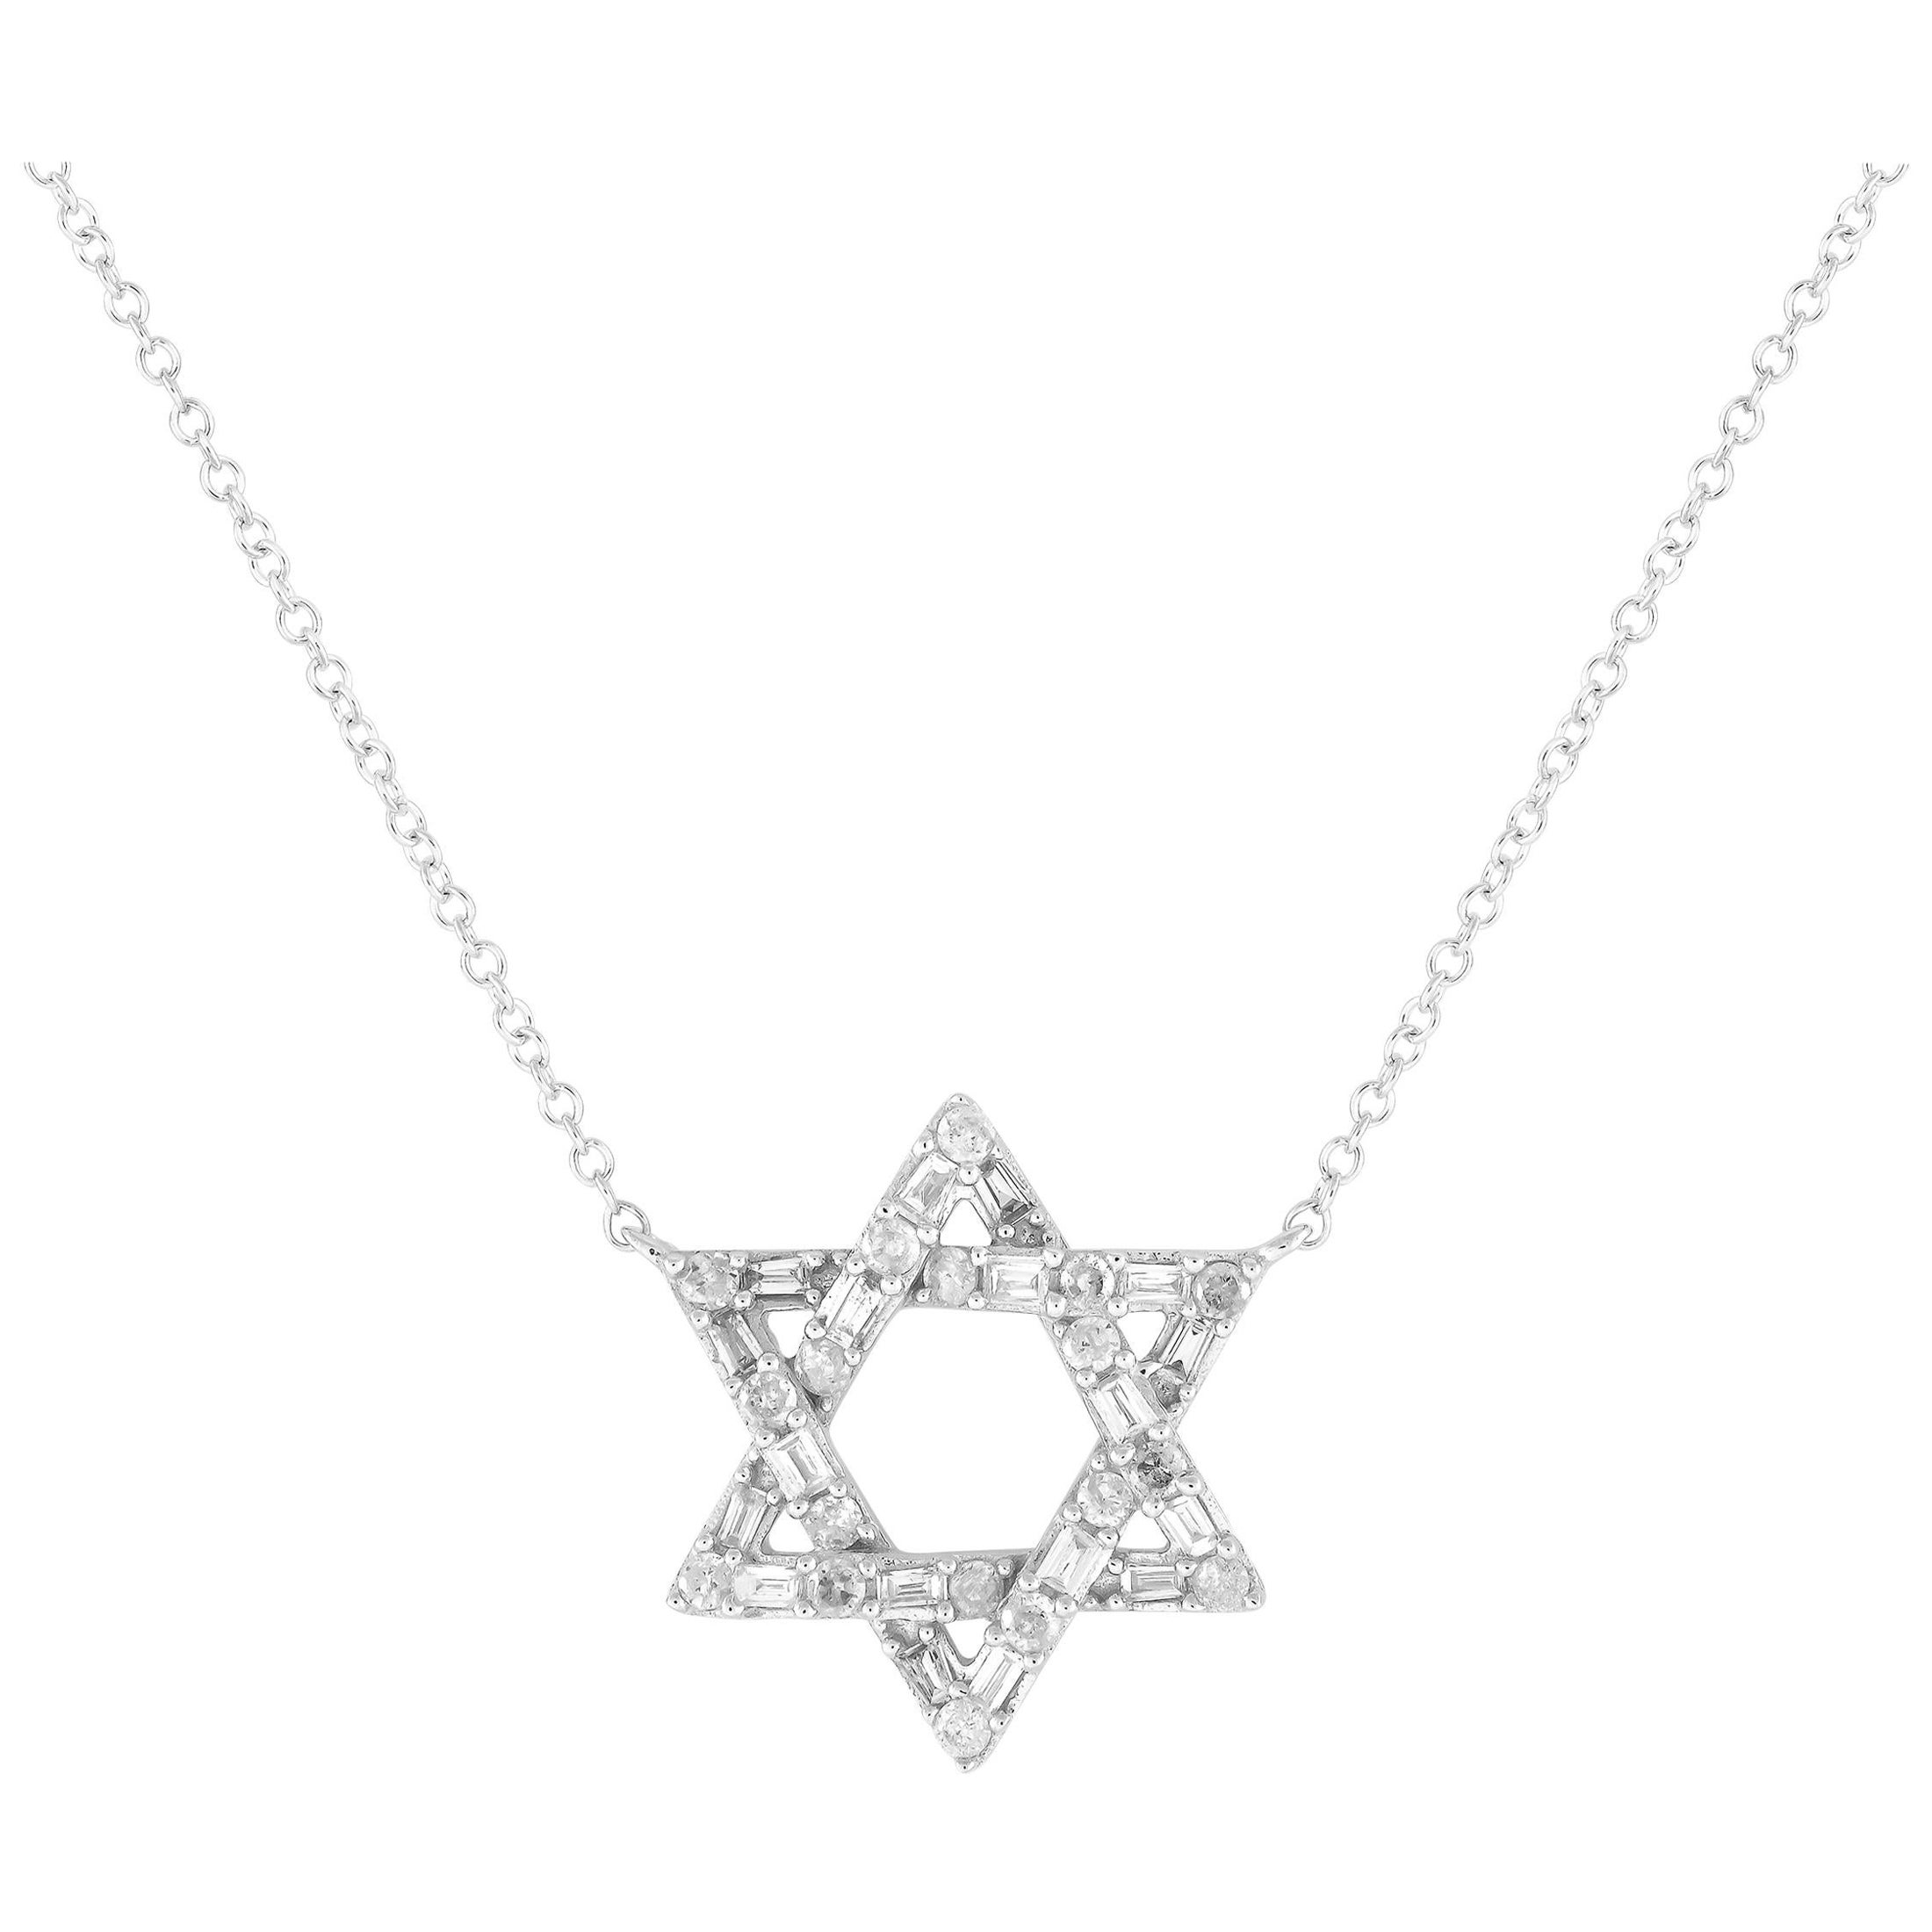 14K White Gold 0.28ct Diamond Star of David Necklace PN15190-W For Sale